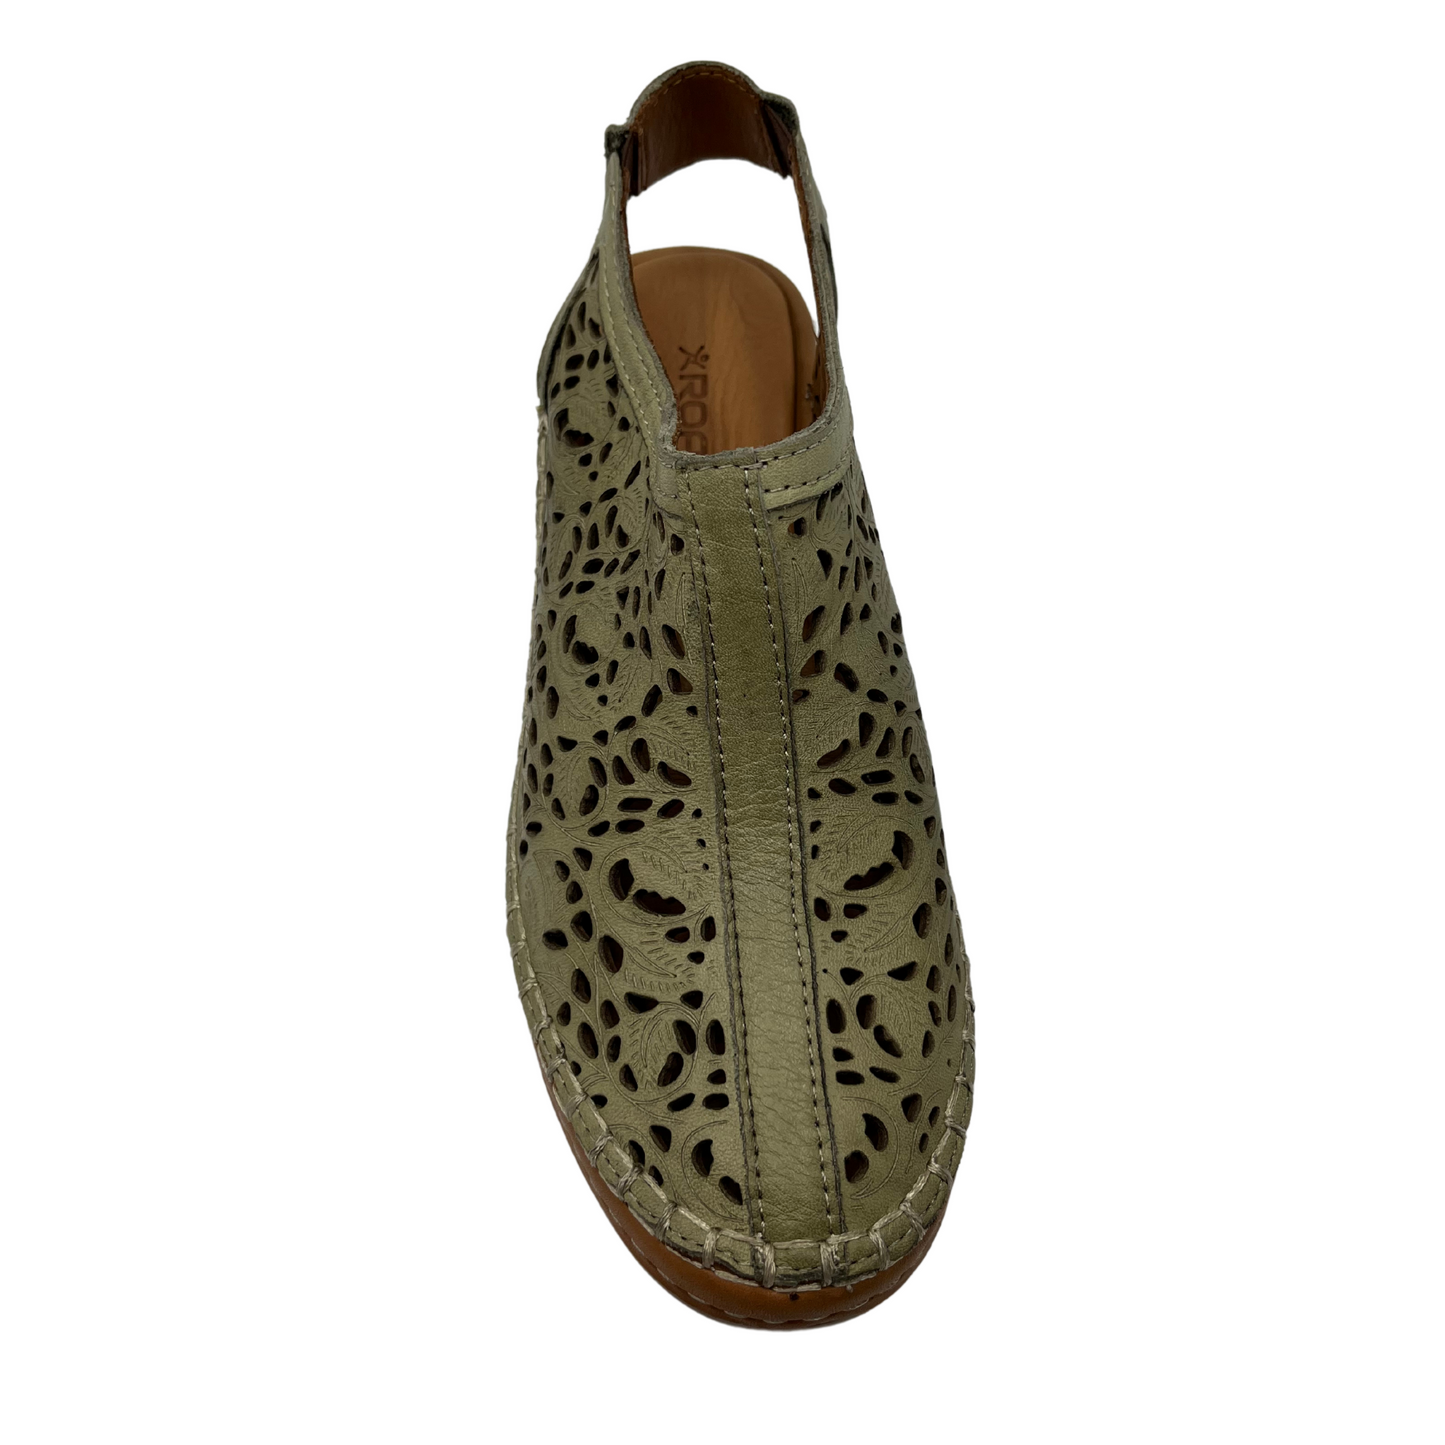 Top view of light green leather shoe with cut out design with low wedge heel